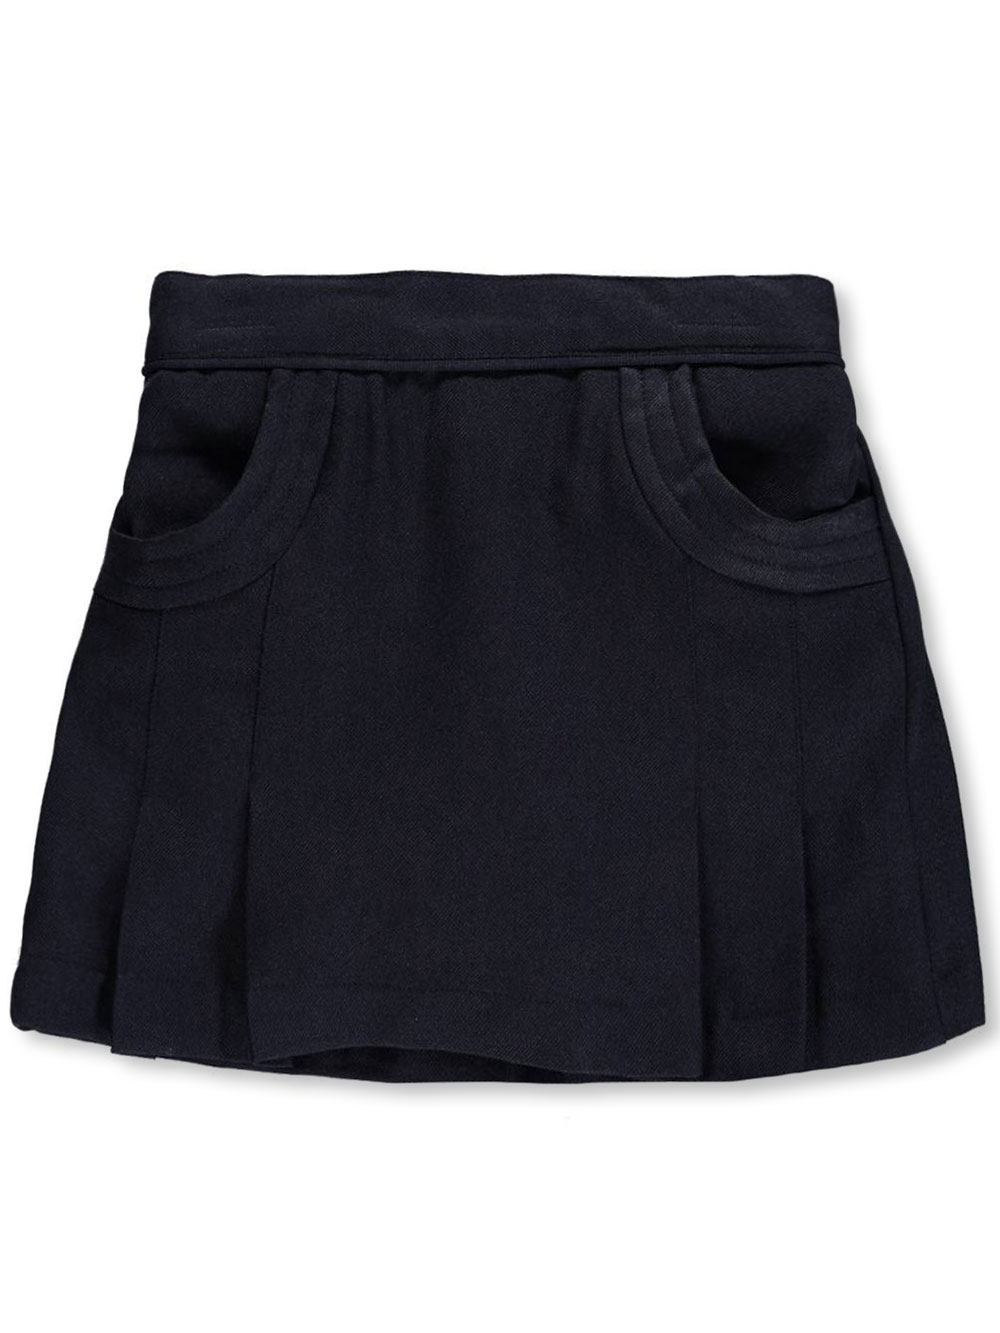 Navy Nautica Little Girls Toddler Stitched Pocket Scooter Skirt 4t 